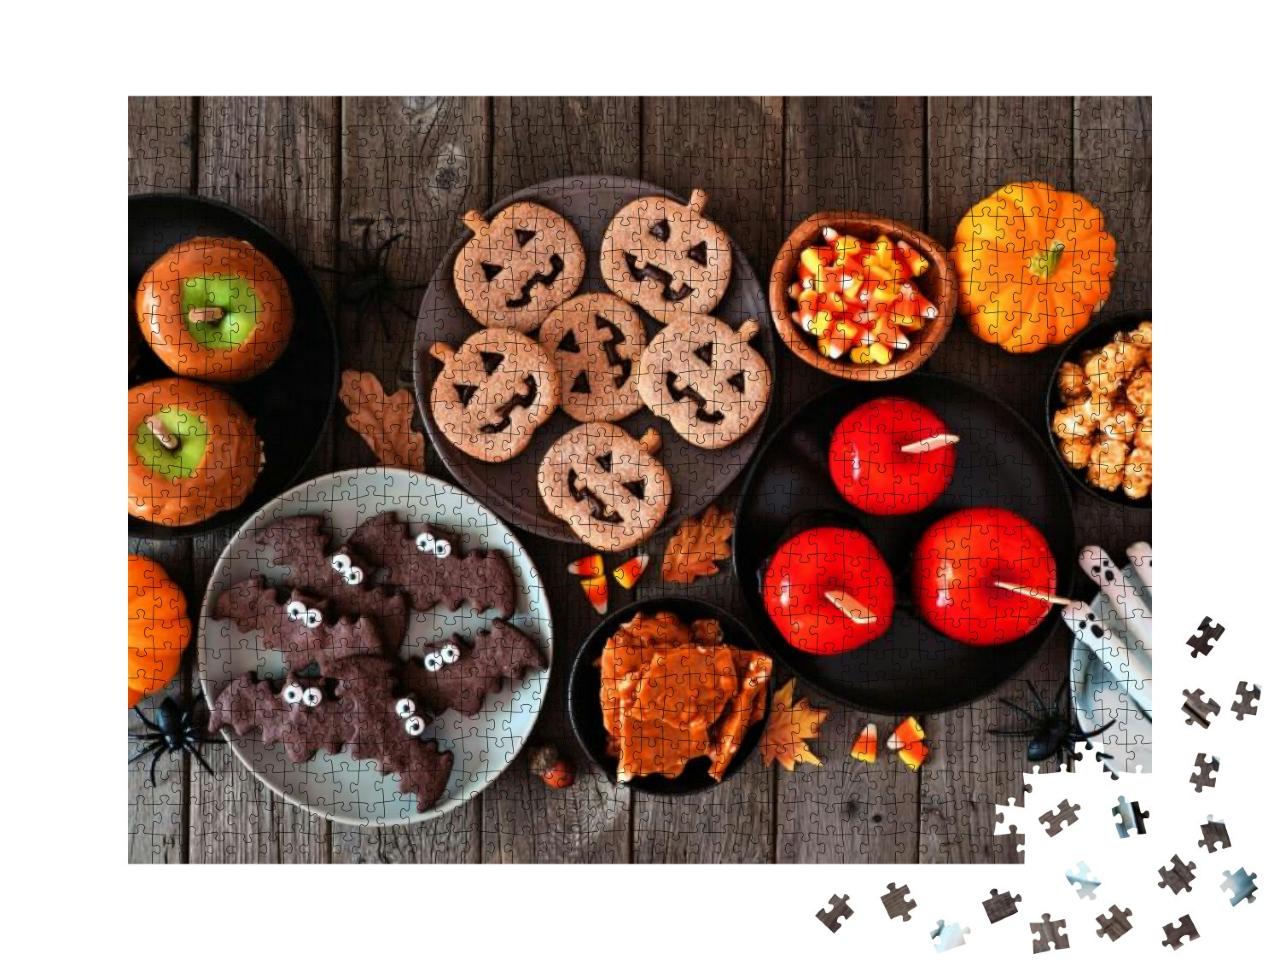 Rustic Halloween Treat Table Scene Over a Dark Wood Backg... Jigsaw Puzzle with 1000 pieces